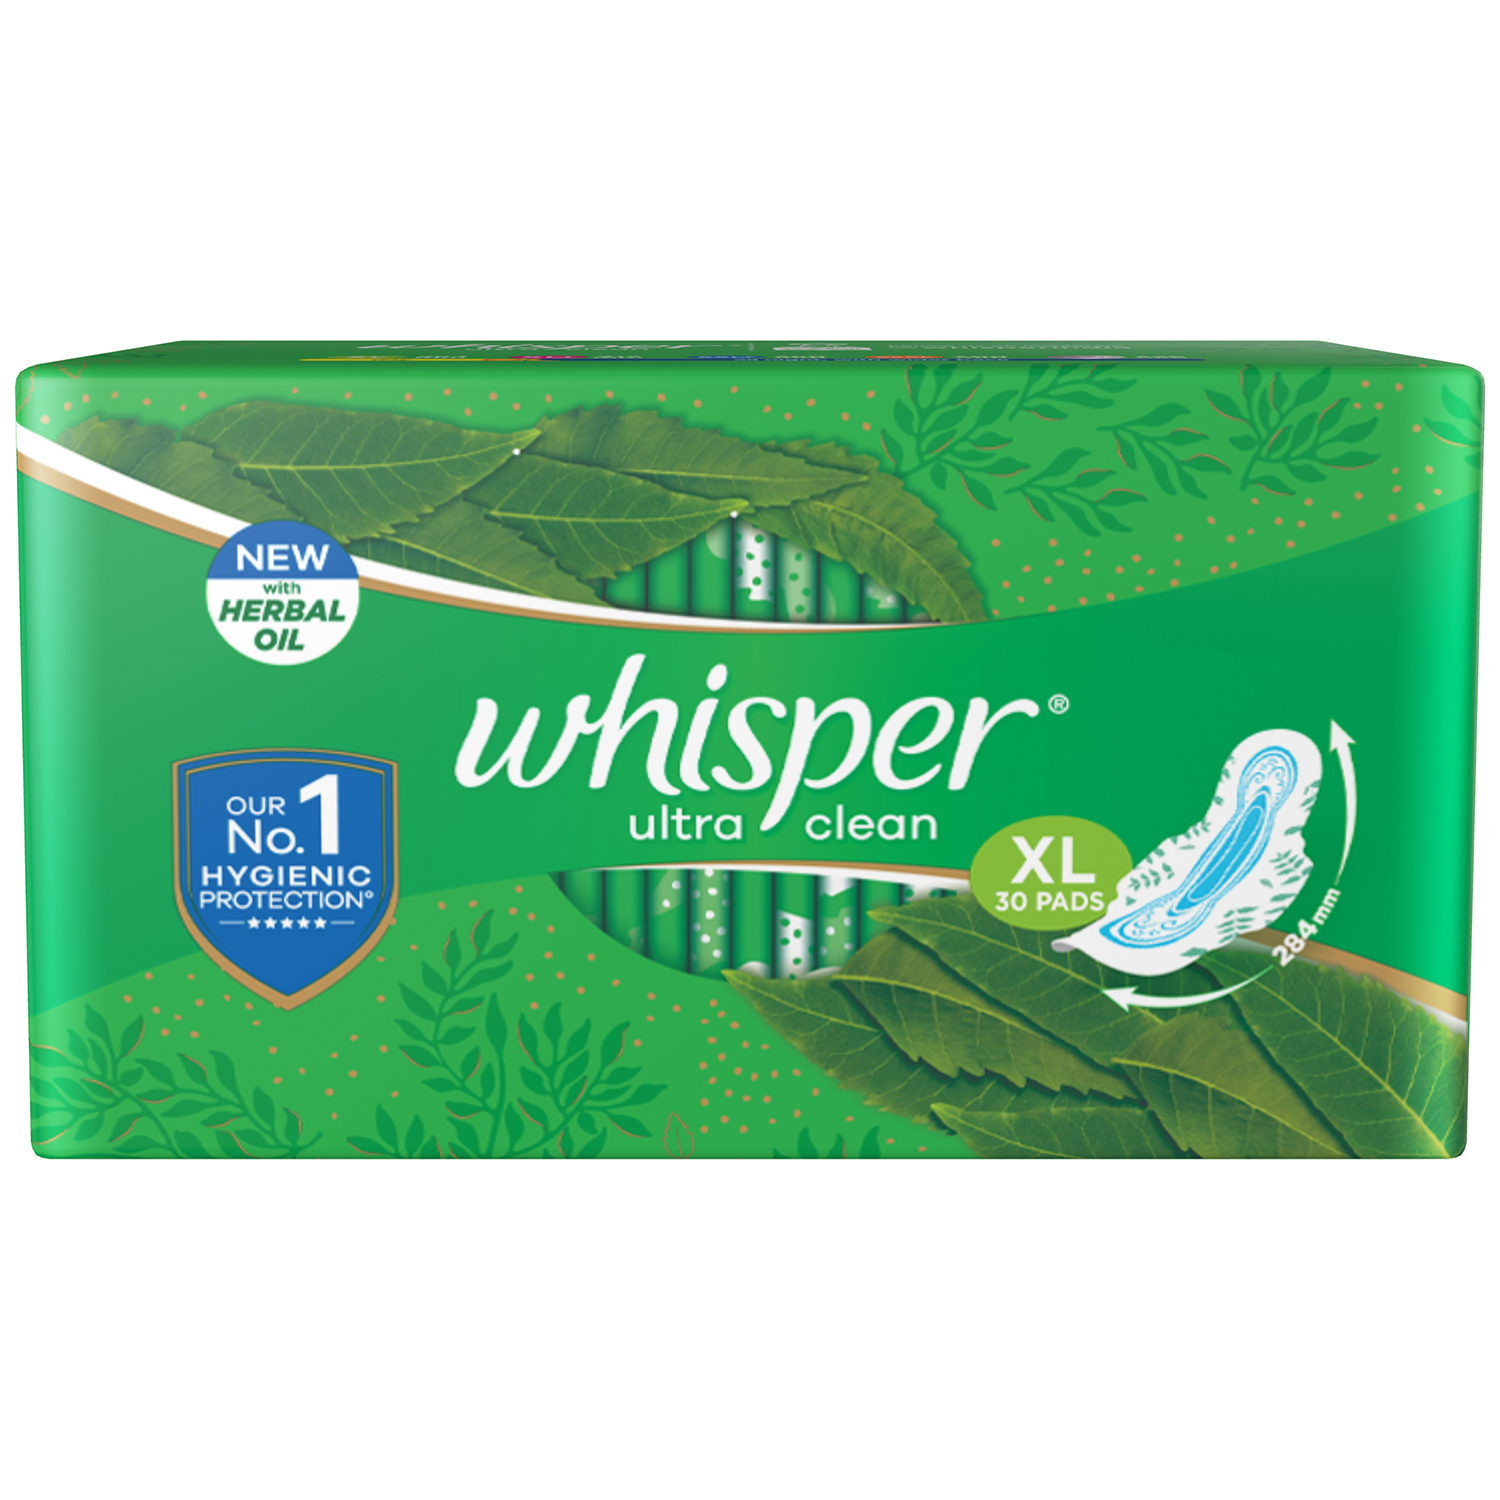 Whisper Ultra Clean XL Sanitary Pads - 30 Count